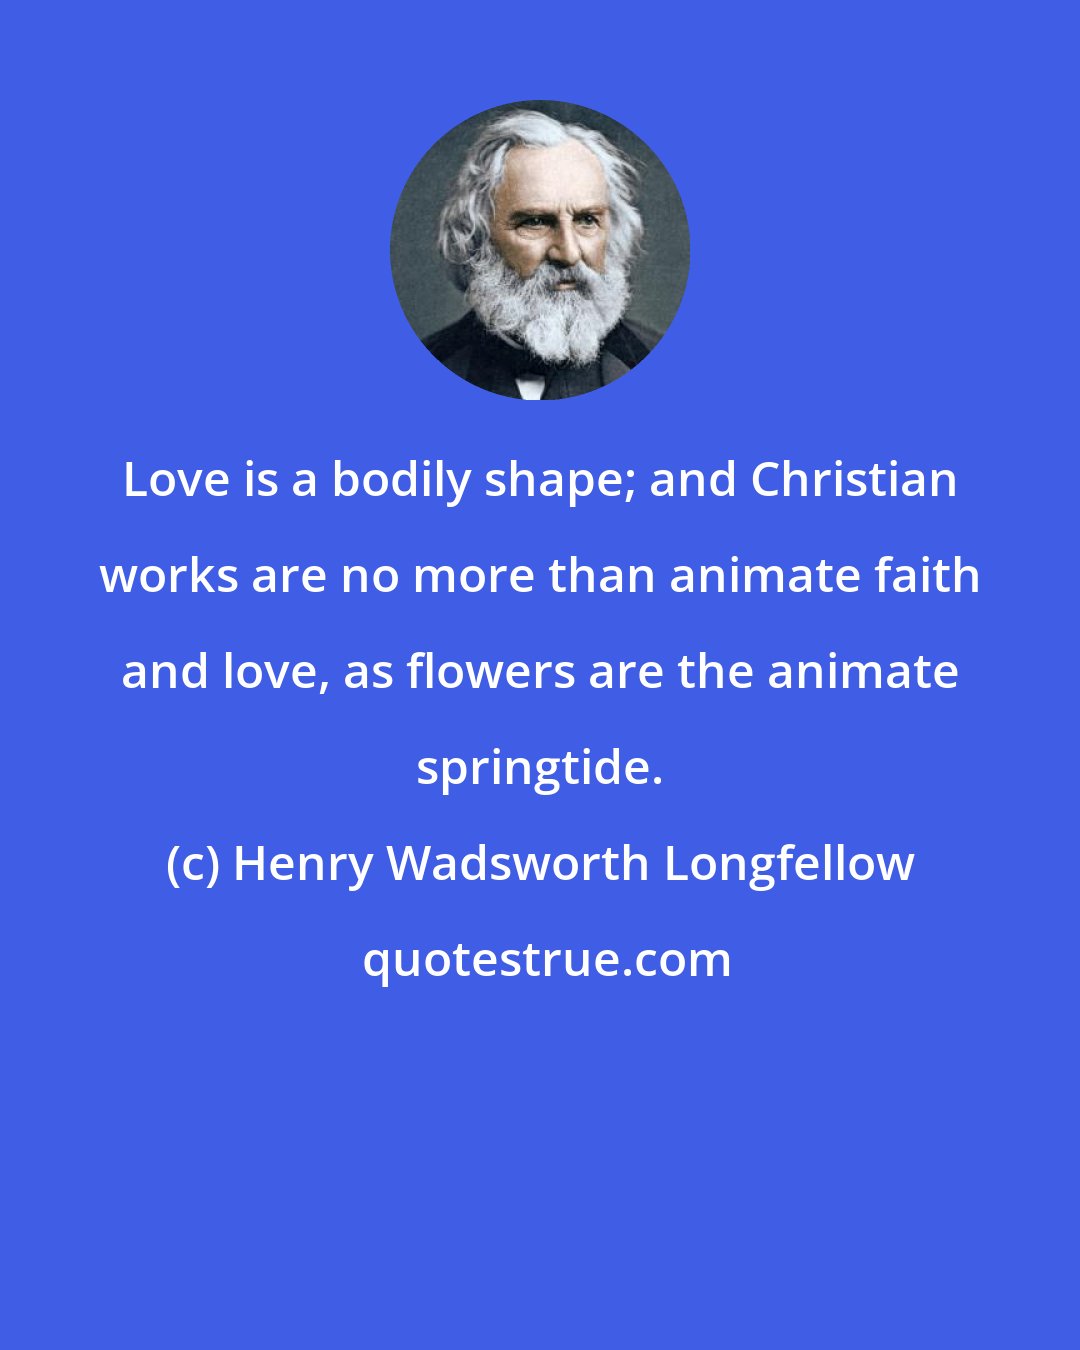 Henry Wadsworth Longfellow: Love is a bodily shape; and Christian works are no more than animate faith and love, as flowers are the animate springtide.